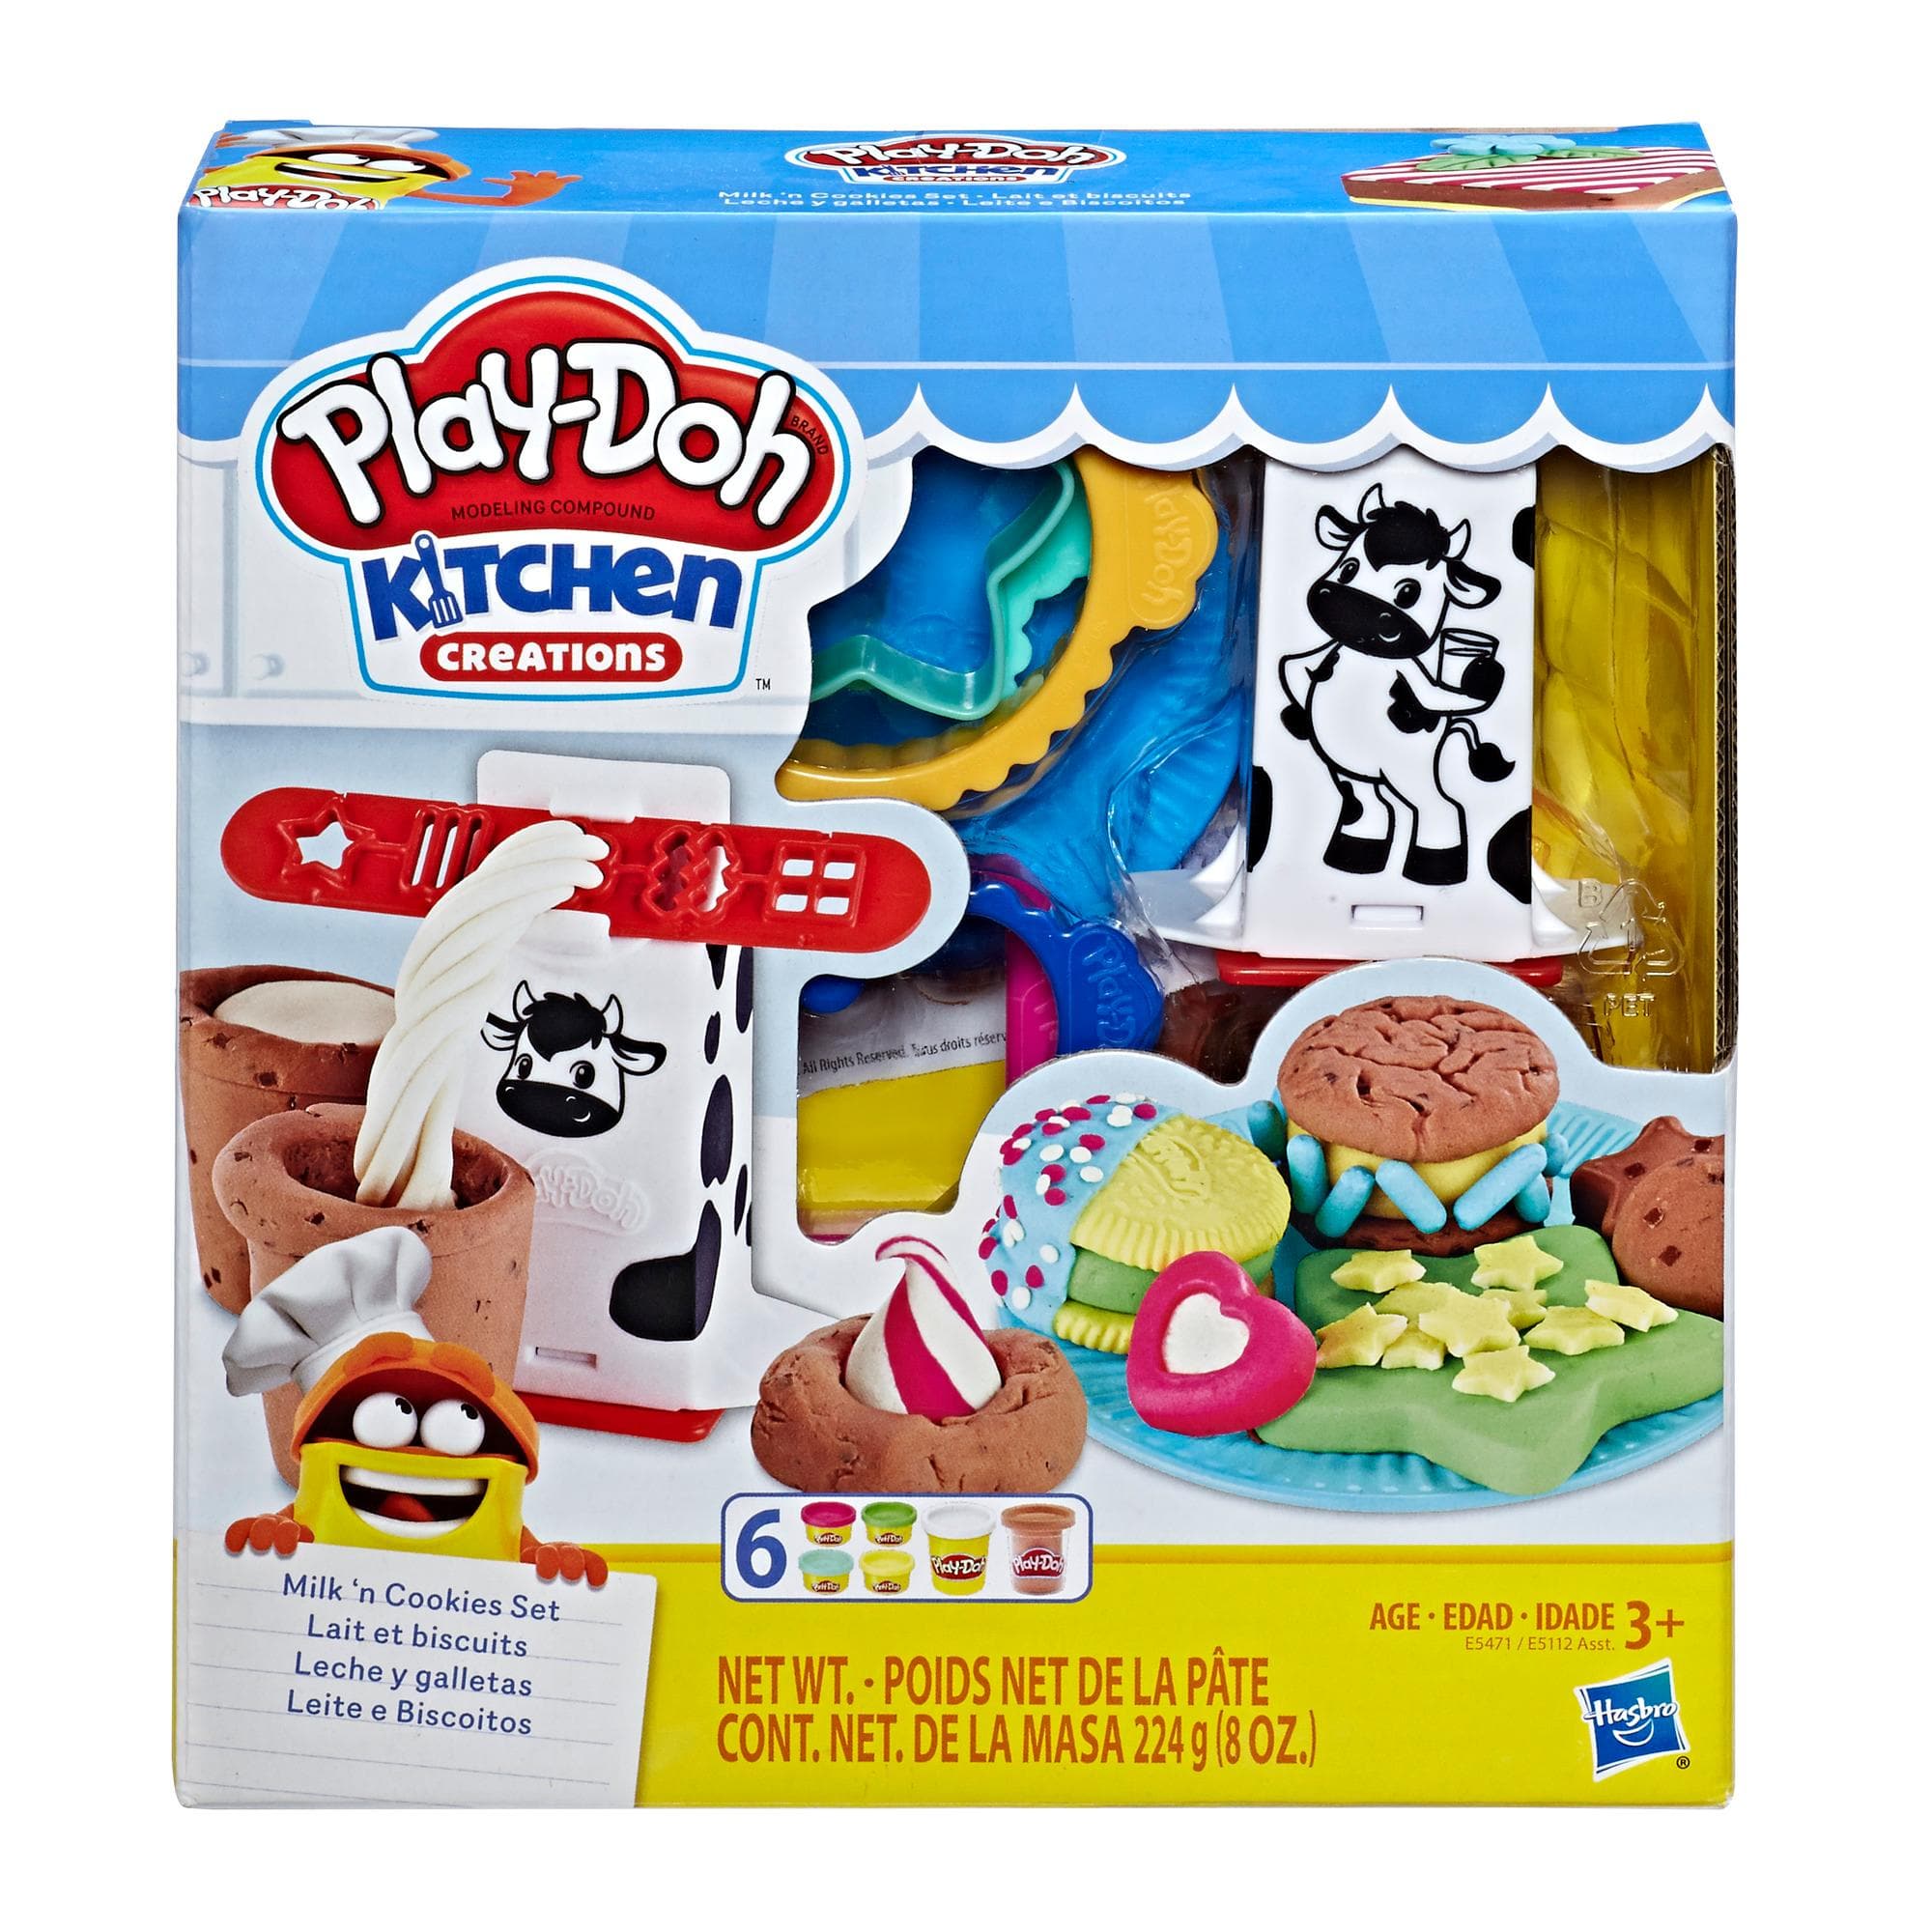 Hasbro-Play-Doh Kitchen Creations Silly Snacks Assortment-E5471-Milk 'n Cookies Set-Legacy Toys